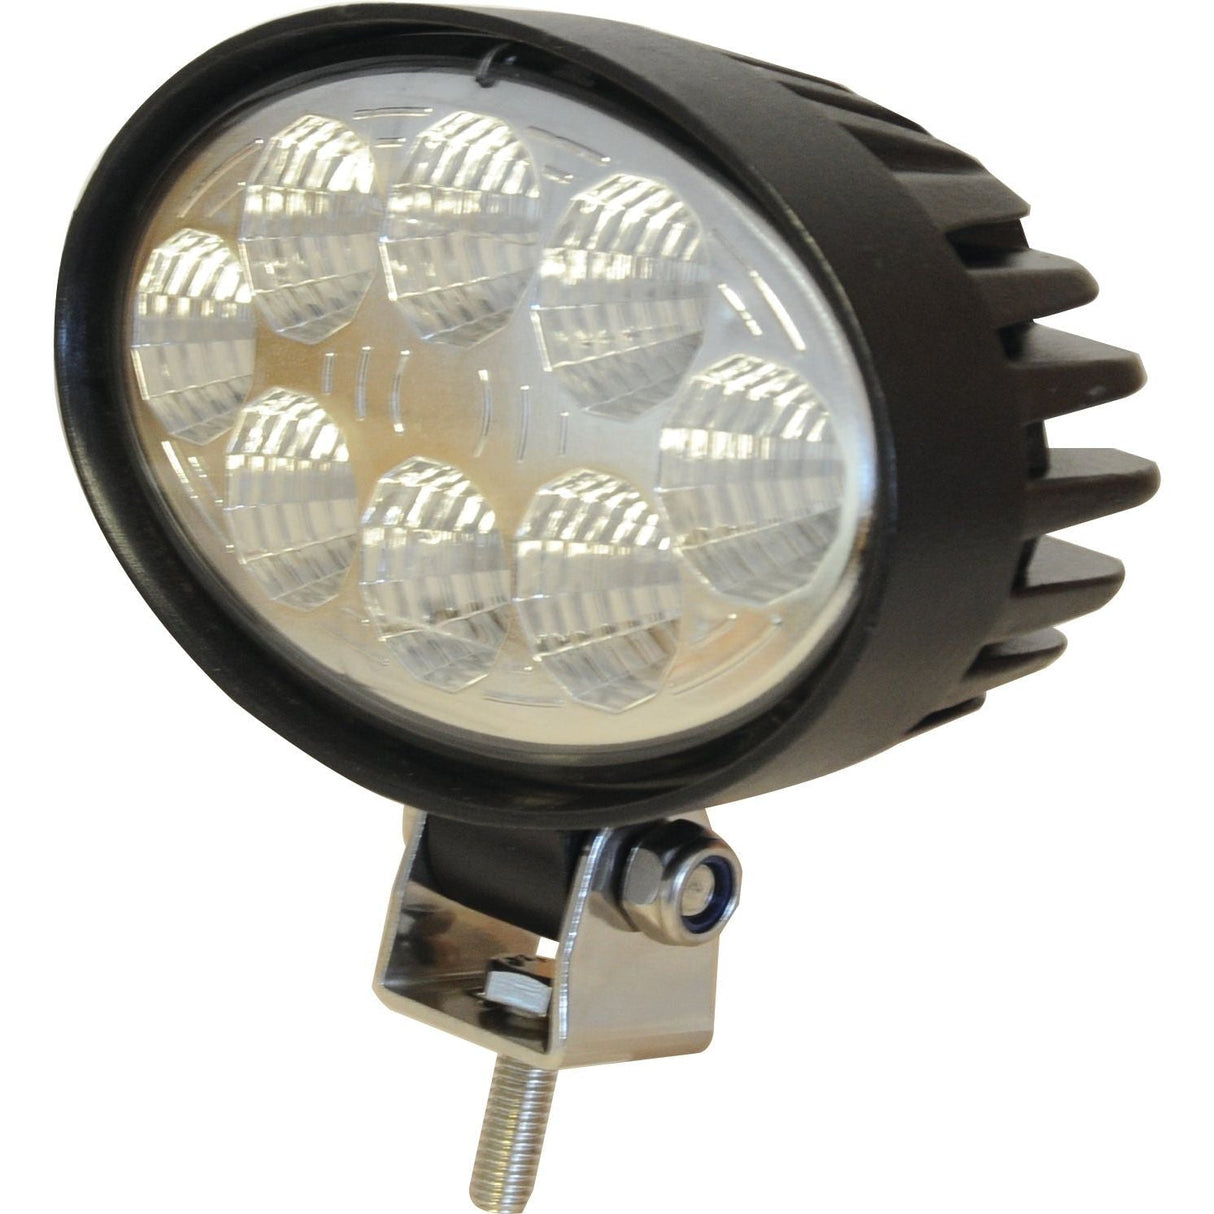 LED Work Light, Interference: Class 1, 3000 Lumens Raw, 10-30V ()
 - S.112527 - Farming Parts